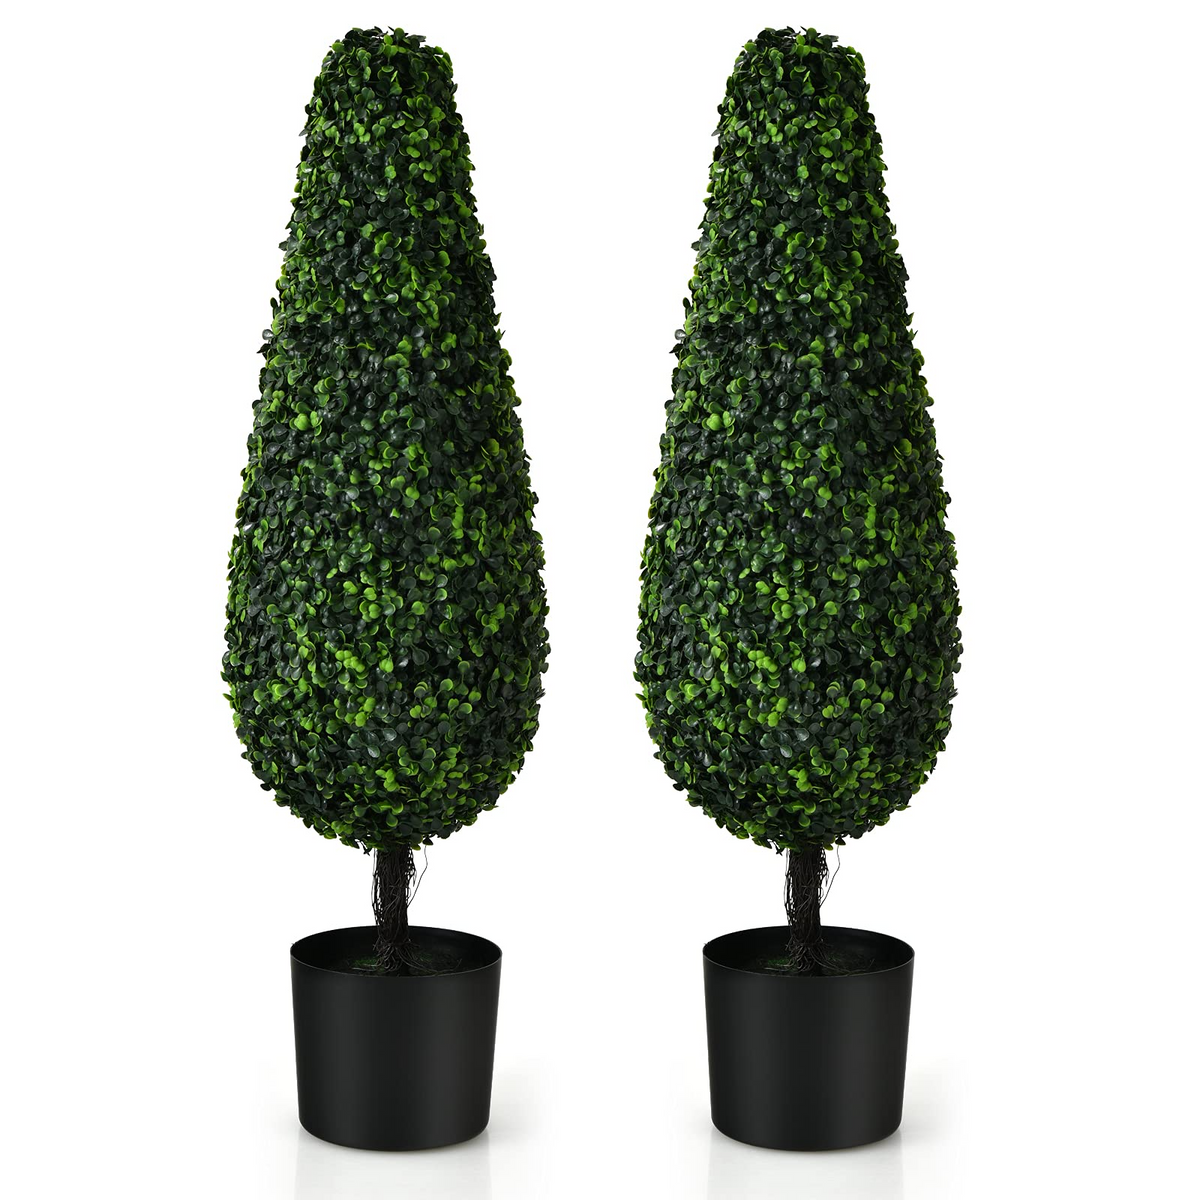 Goplus 3ft Artificial Boxwood Tower Topiary Trees, 2 Pack Faux Decorative Plants in Cement-Filled Plastic Pot - GoplusUS